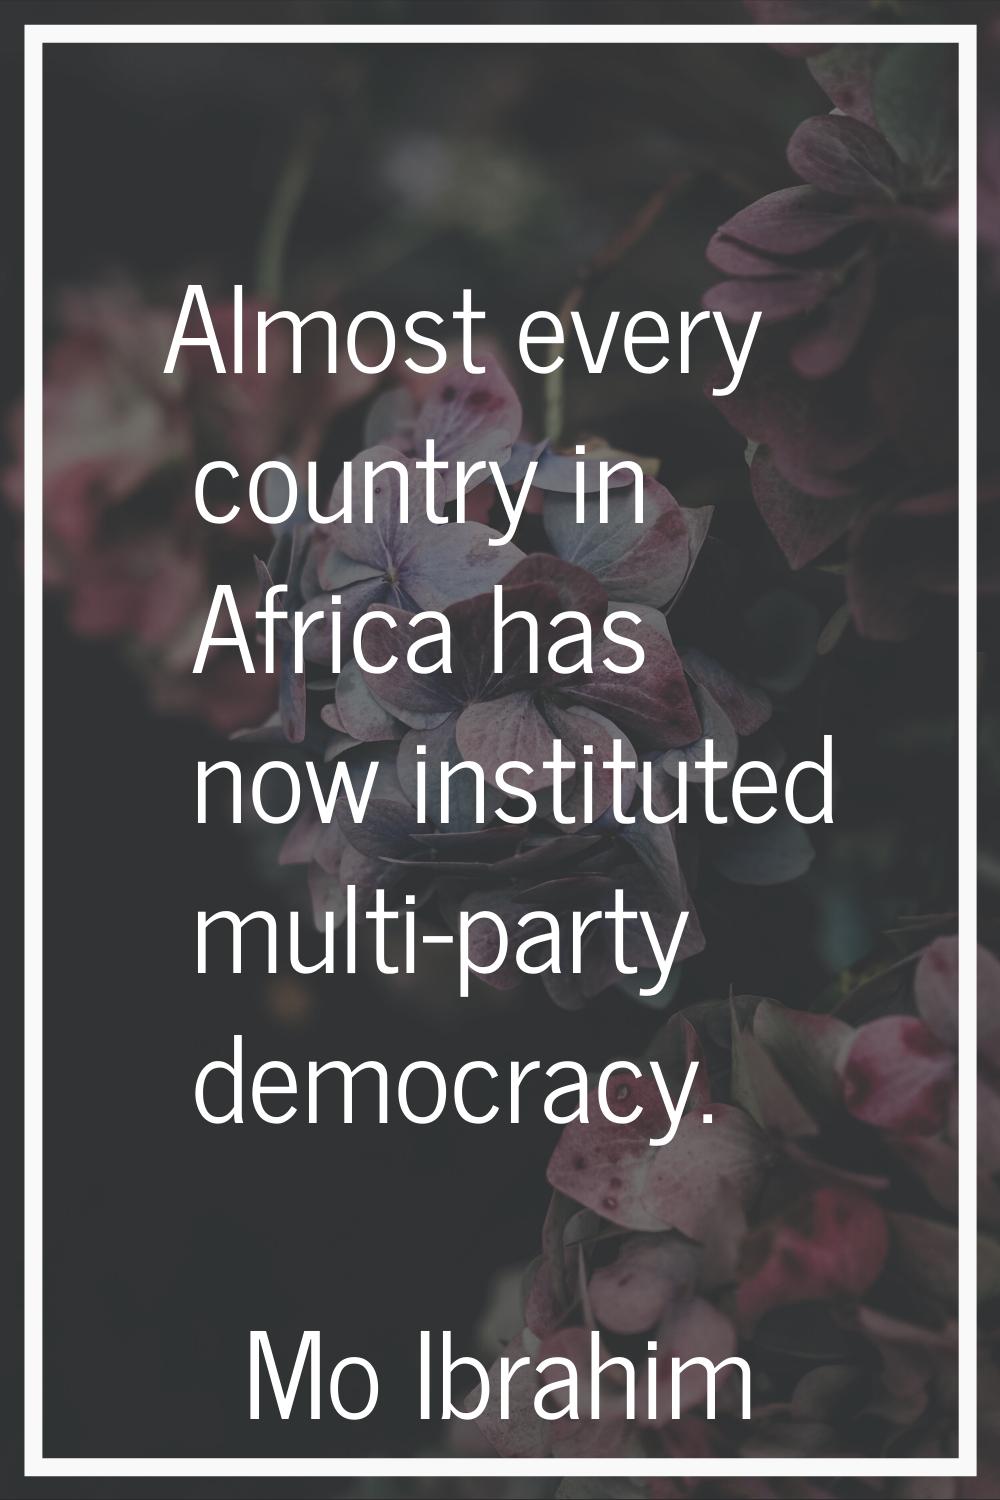 Almost every country in Africa has now instituted multi-party democracy.